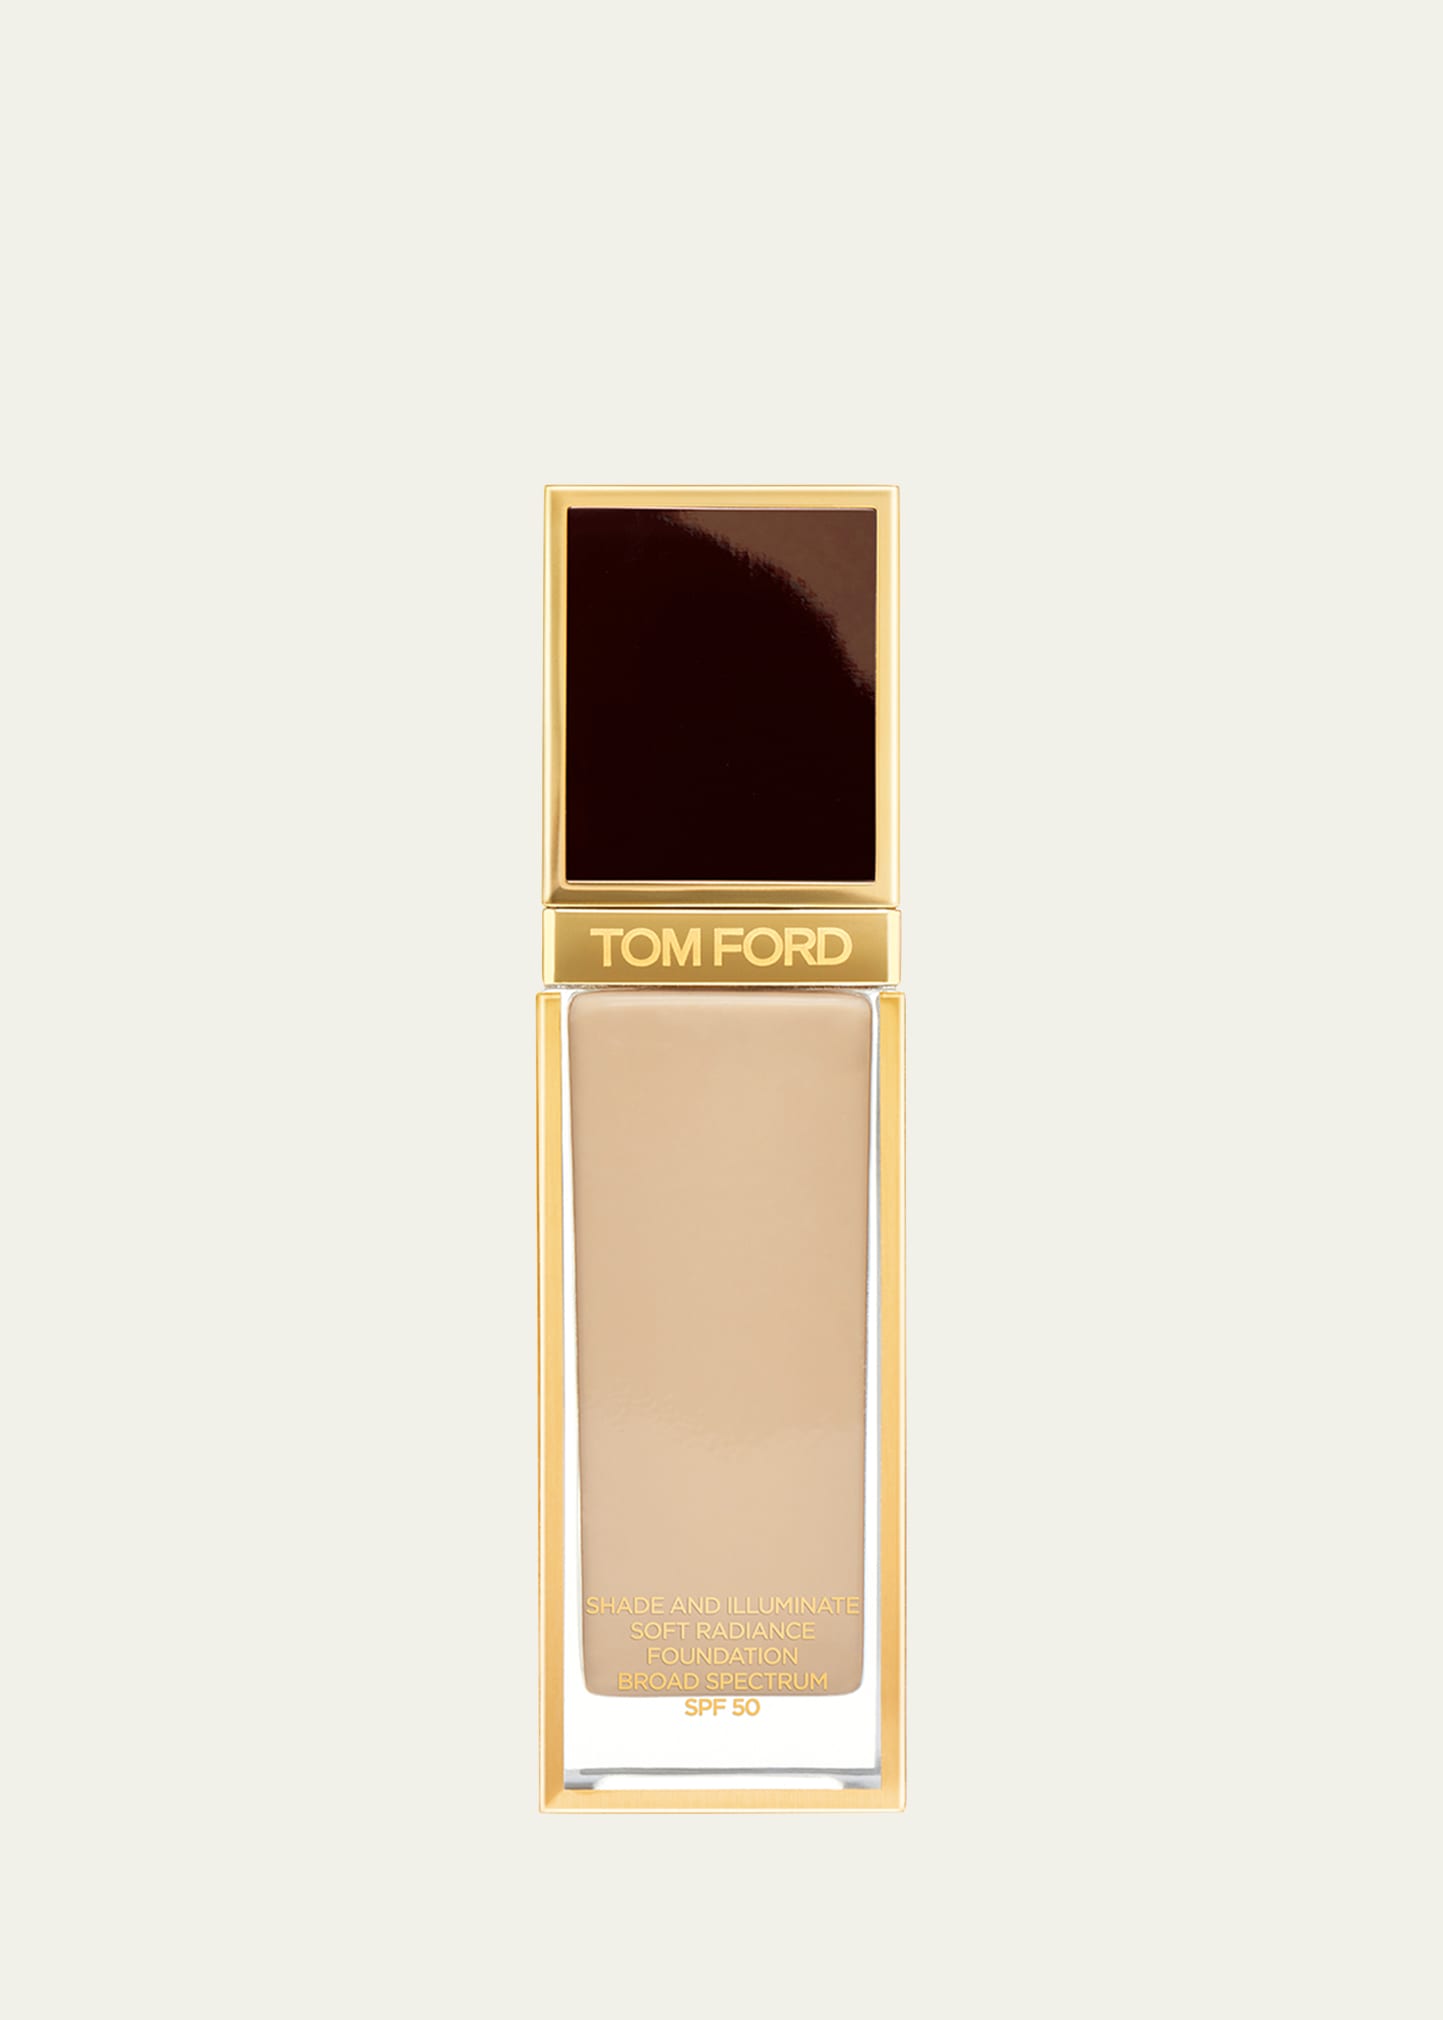 Tom Ford 1 Oz. Shade And Illuminate Soft Radiance Foundation Spf 50 In 6.0 Natural